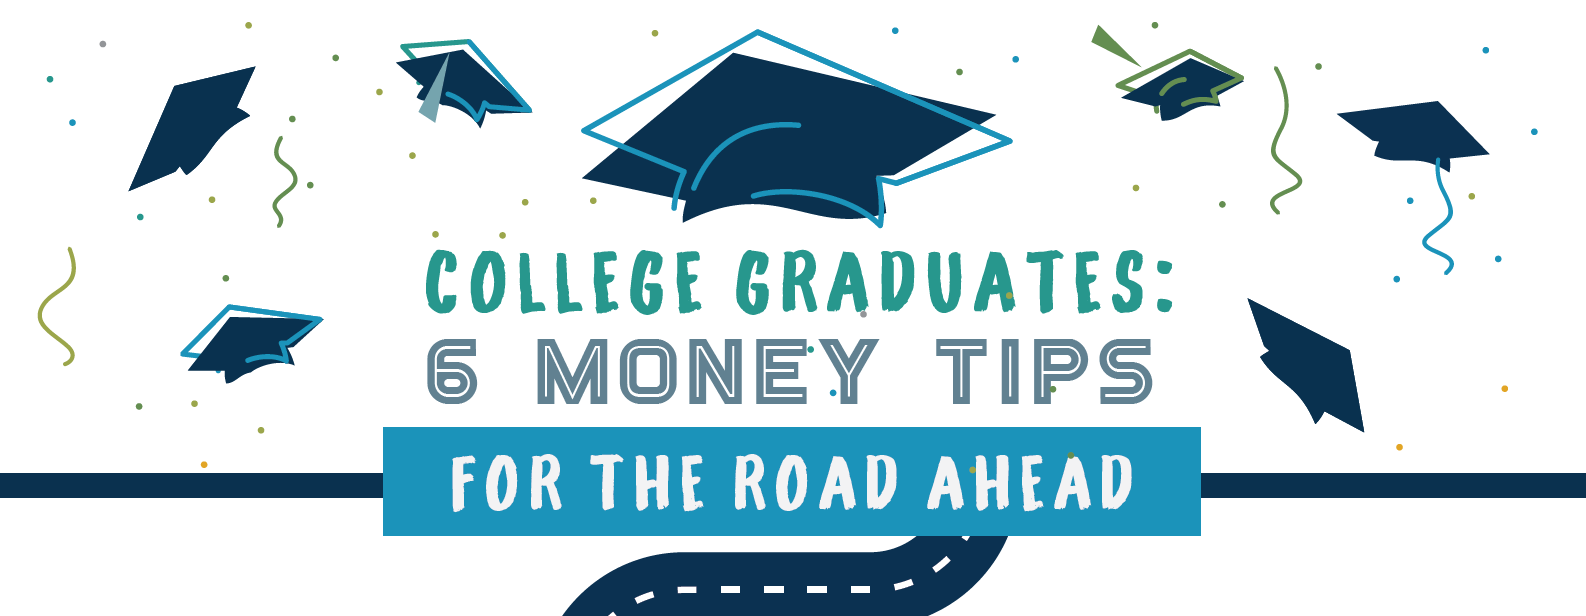 Blue and green confetti and graduation caps surround text that reads College Graduates: 6 Money Tips for the Road Ahead